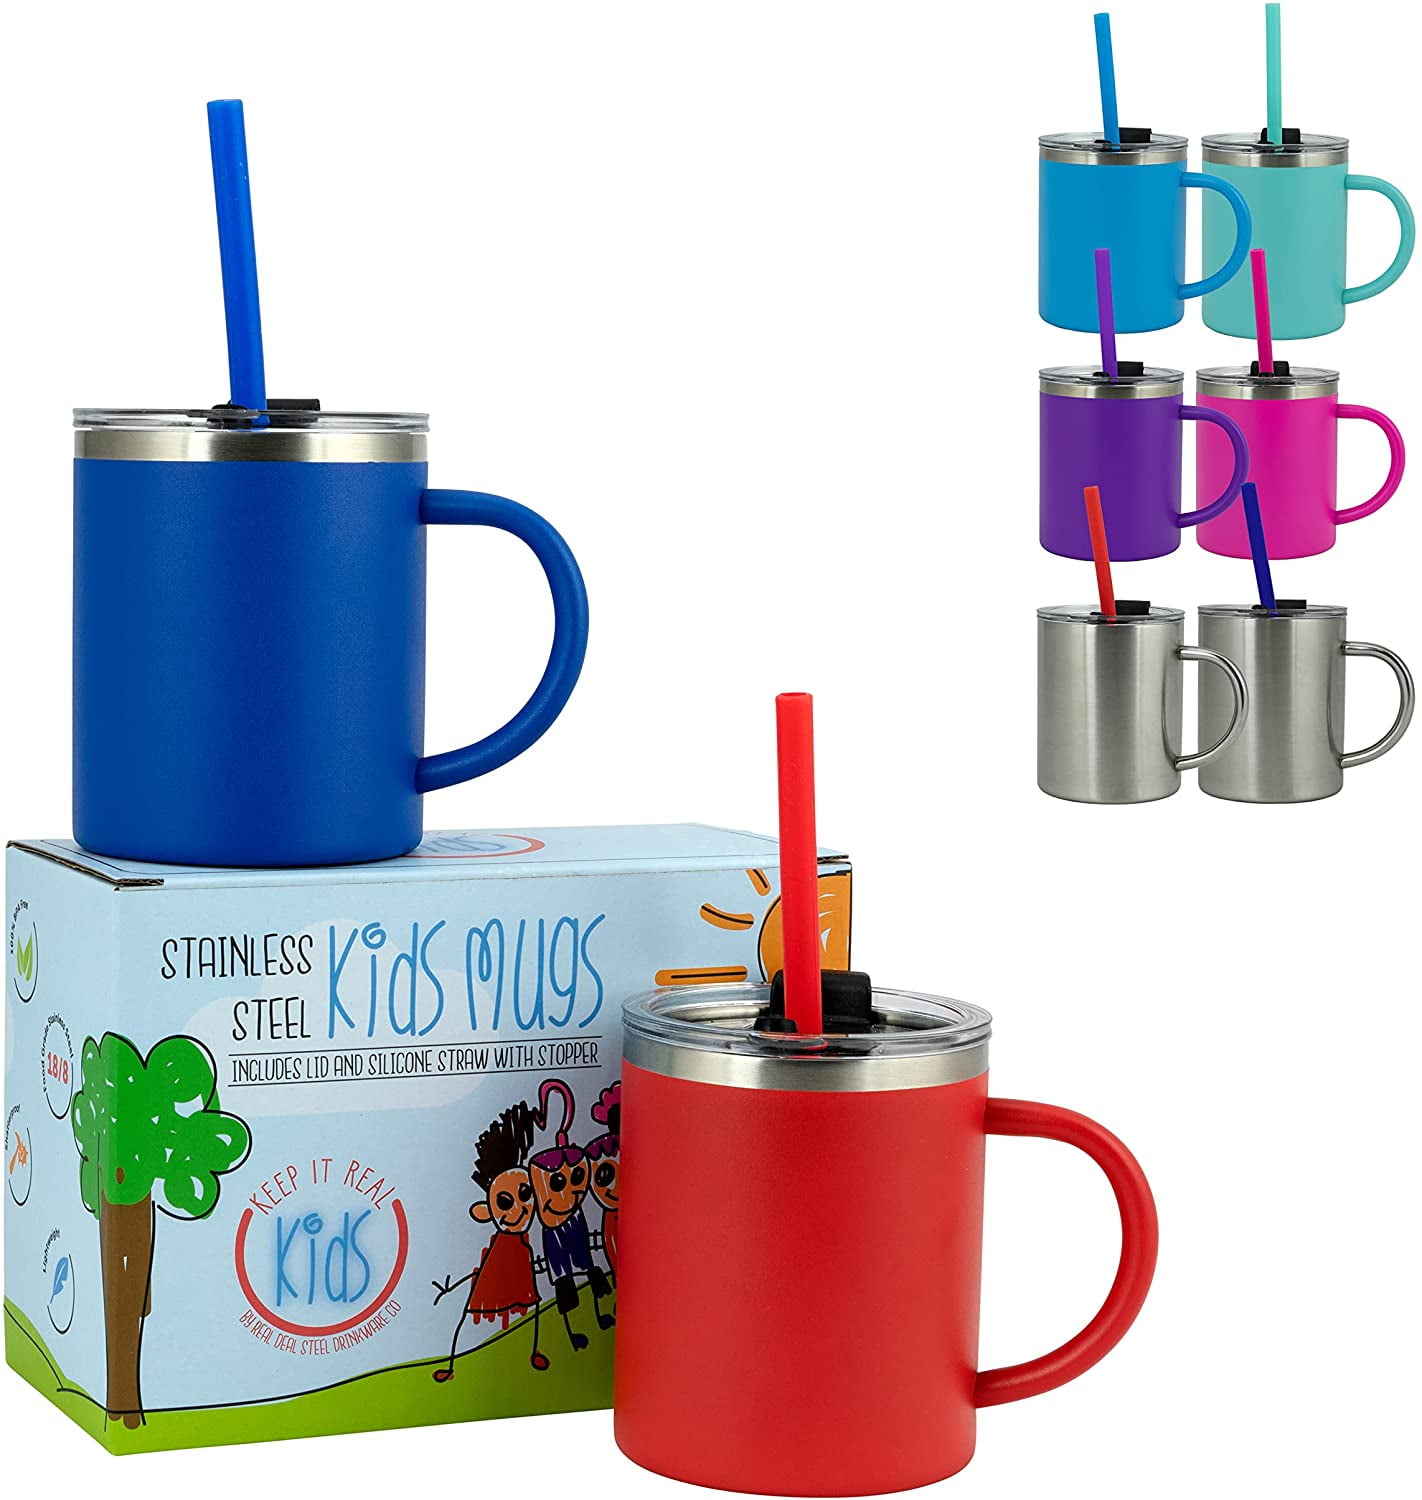 Stainless Steel Kids Mugs - BPA Free 10 oz Childrens Cup, Coffee Style Mugs for Hot Chocolate, Milk, Set of 2 with Handle, Lid and Straw (Purple /